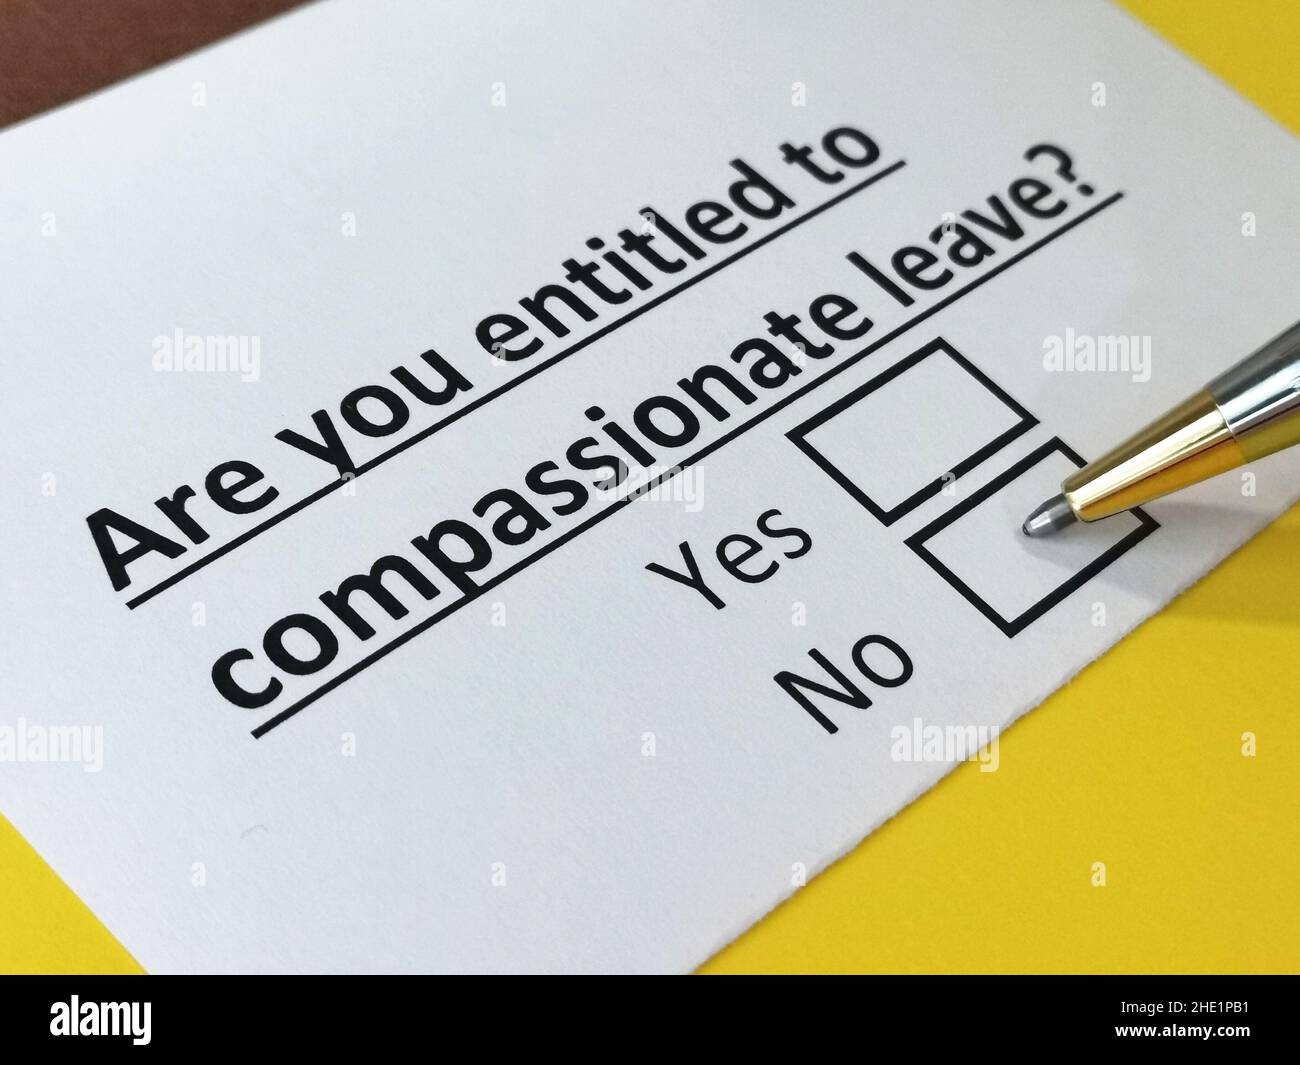 One person is answering question about compassionate leave. Stock Photo